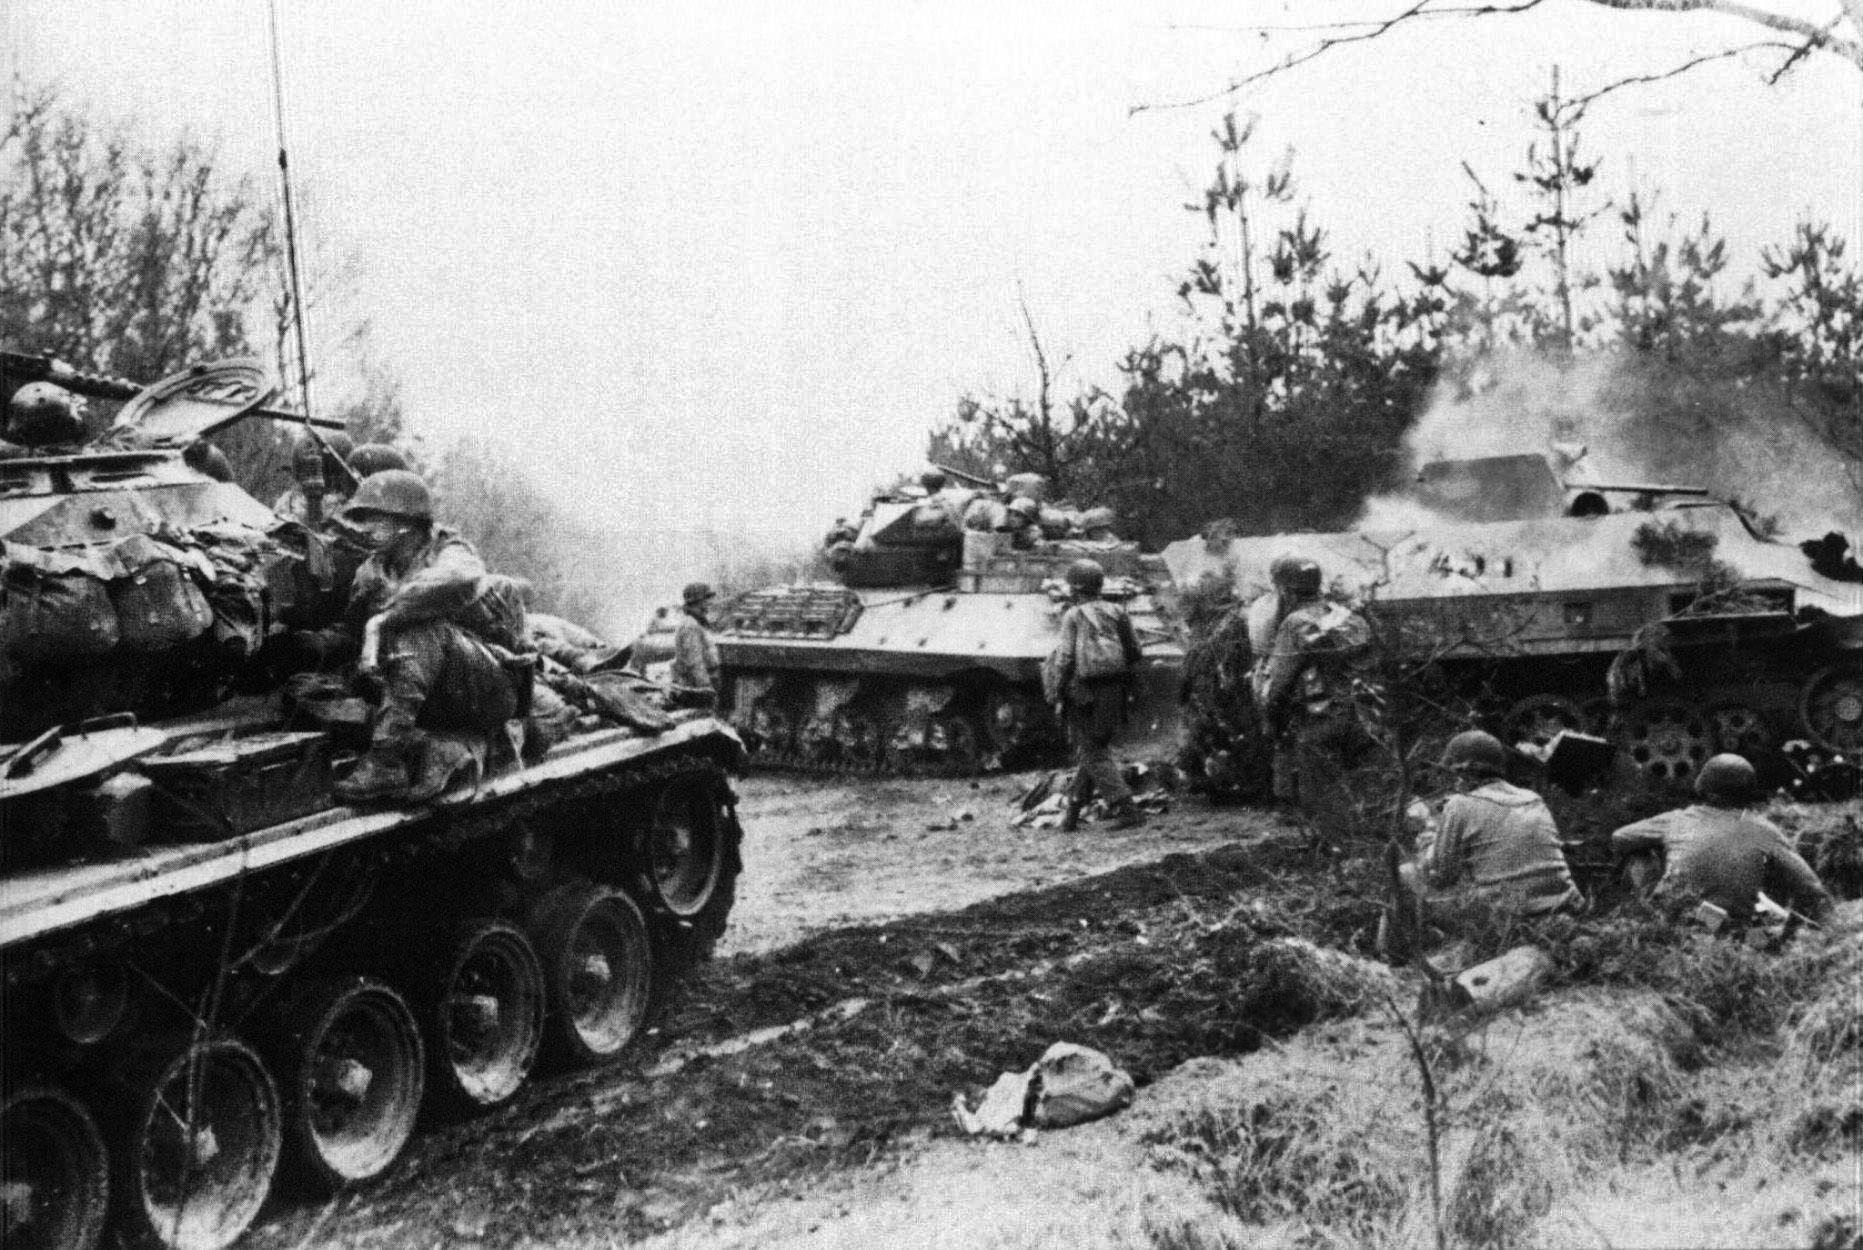 American troops and armored vehicles pause in their advance as a German Hanomag Sk.Kfz/251 (right) burns.